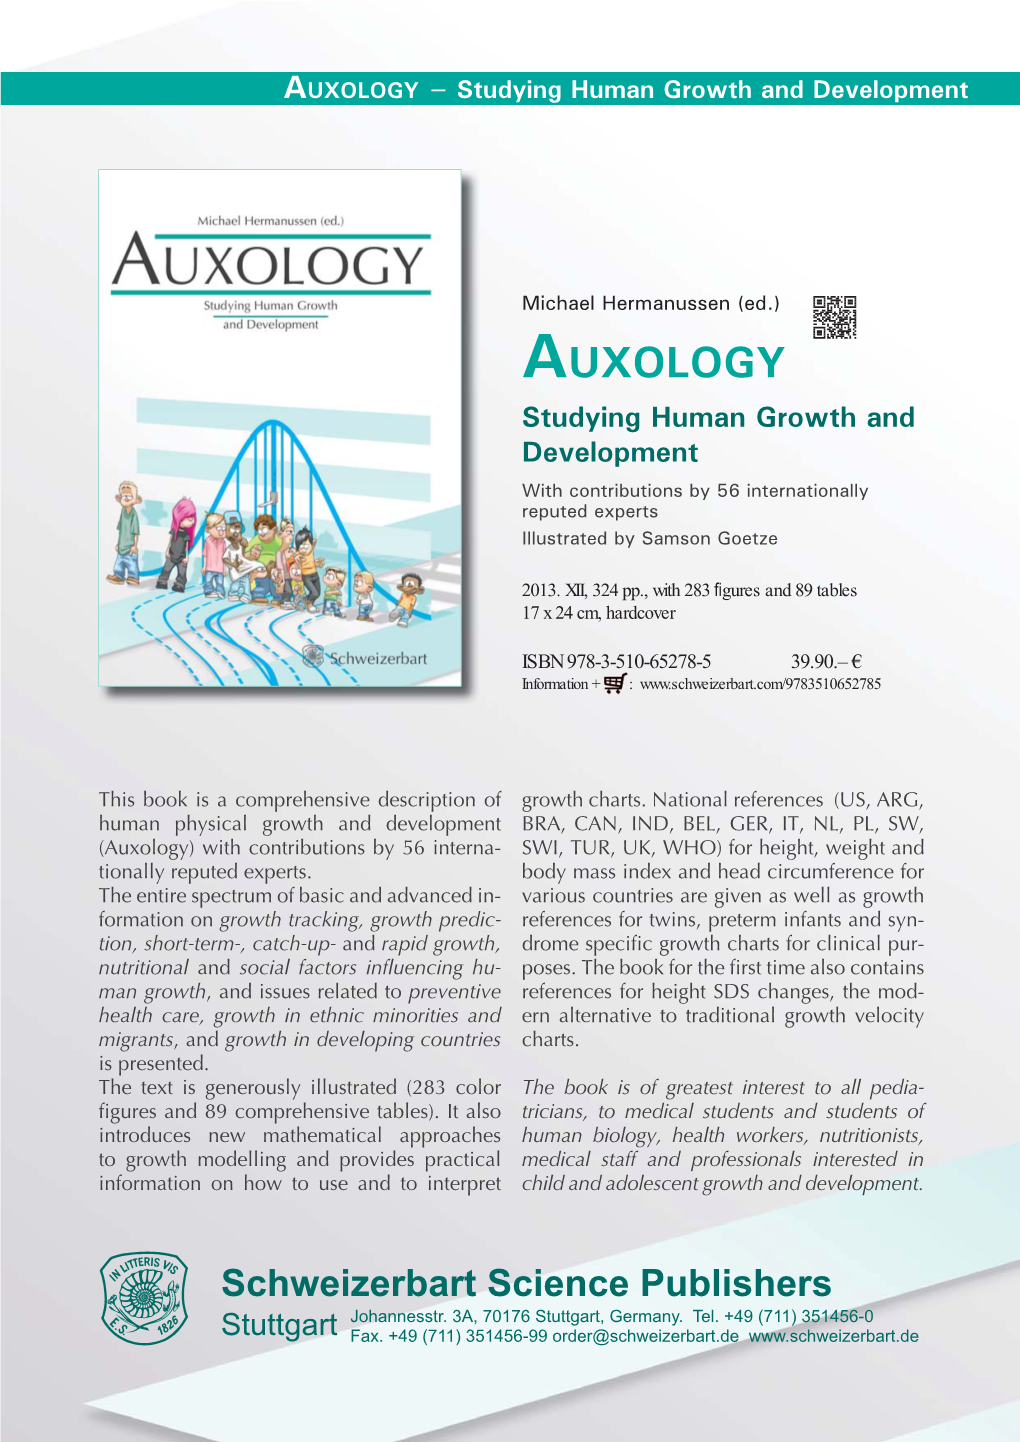 AUXOLOGY – Studying Human Growth and Development